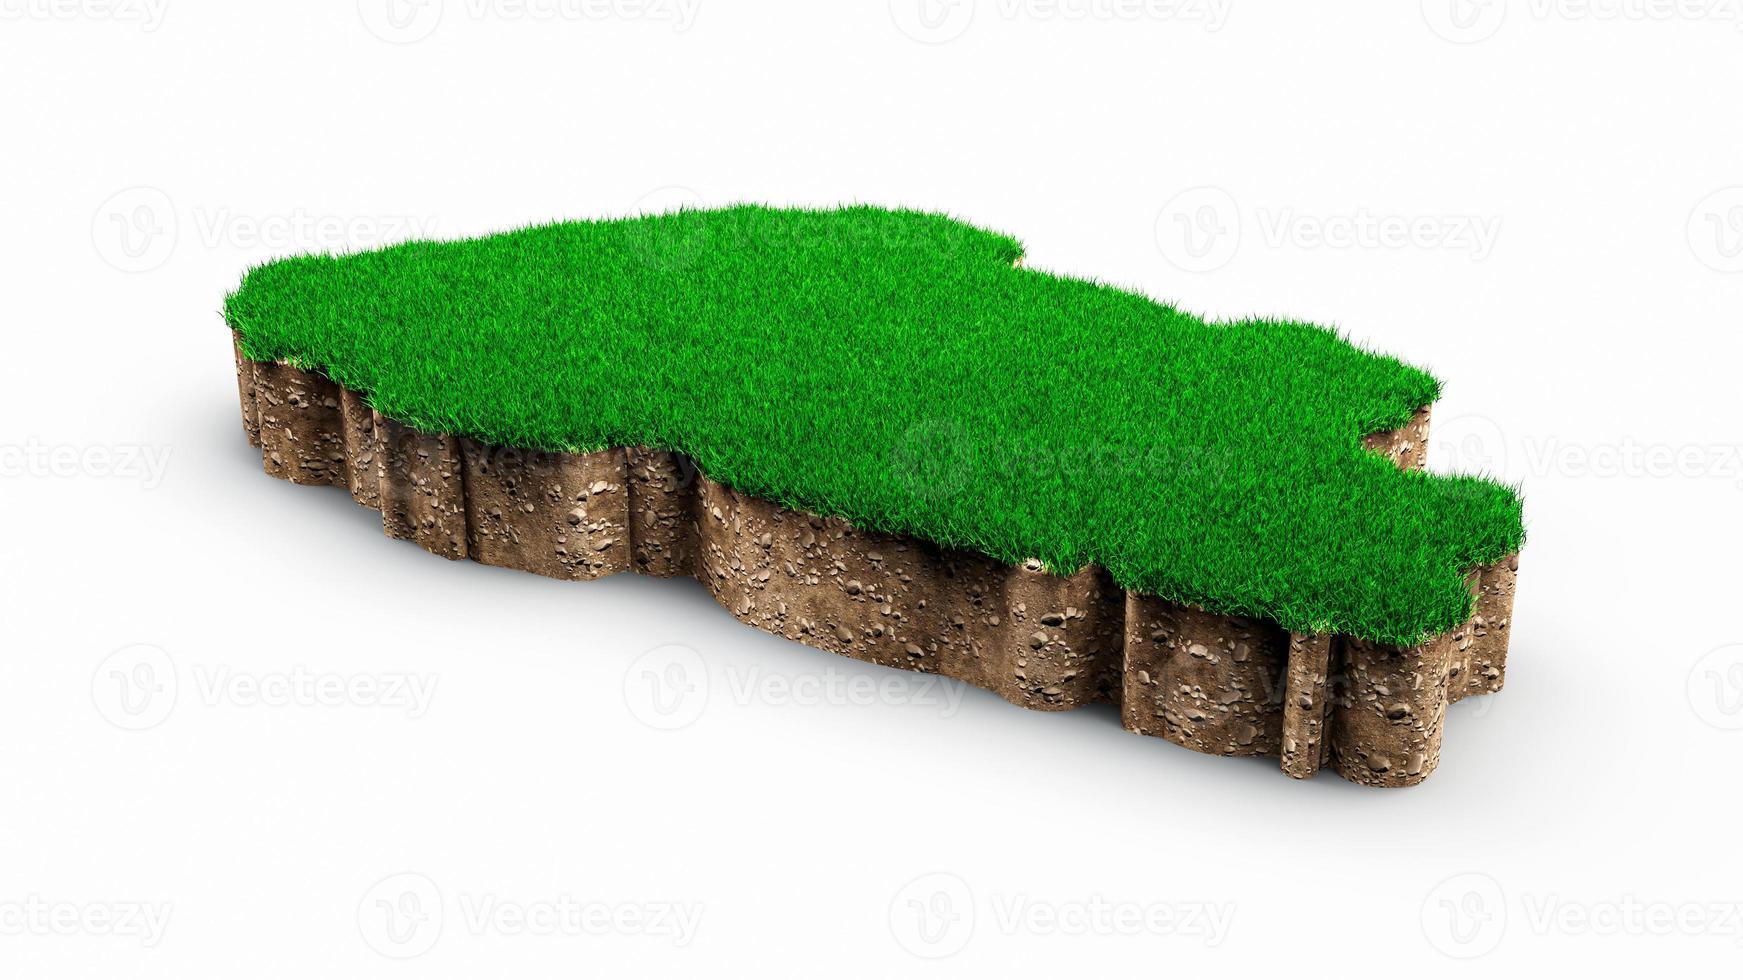 Bhutan Map soil land geology cross section with green grass and Rock ground texture 3d illustration photo